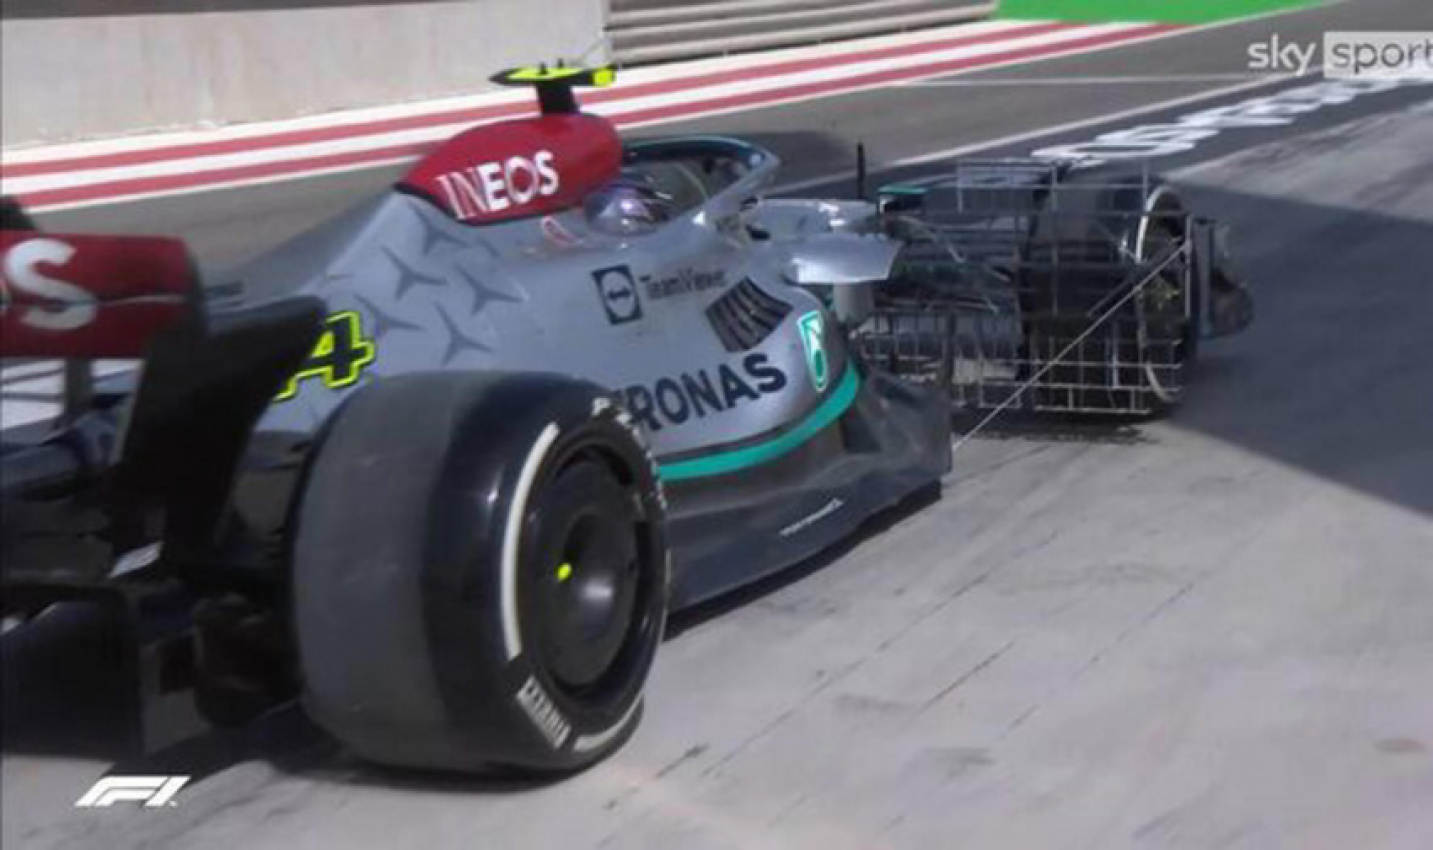 autos, cars, mercedes-benz, mercedes, vnex, first pictures of radical w13 design as lewis hamilton shows off new mercedes in bahrain